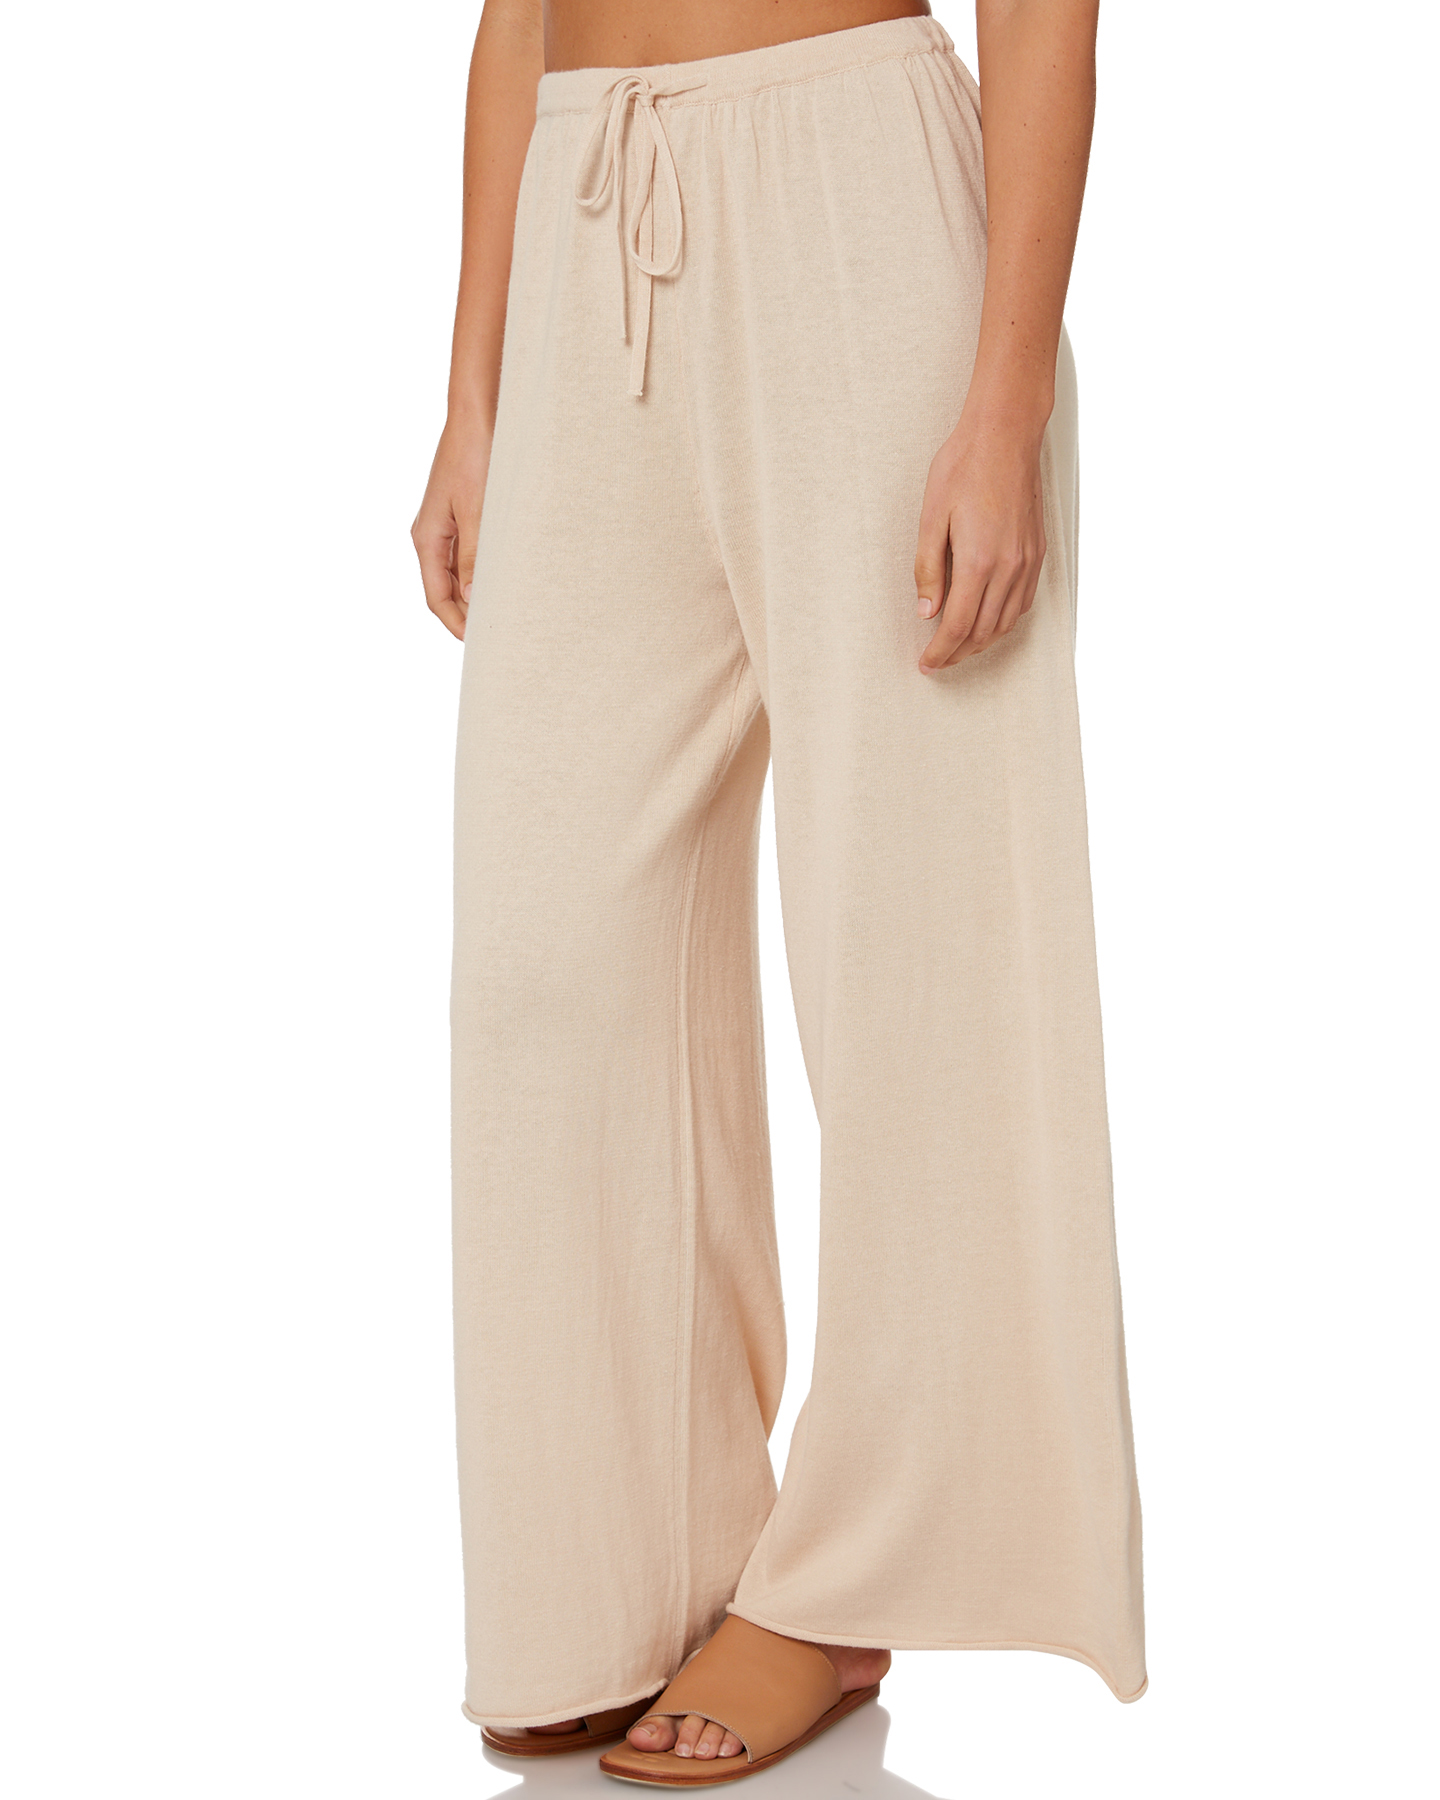 Zulu And Zephyr Lounge Knit Pant - Beige | SurfStitch